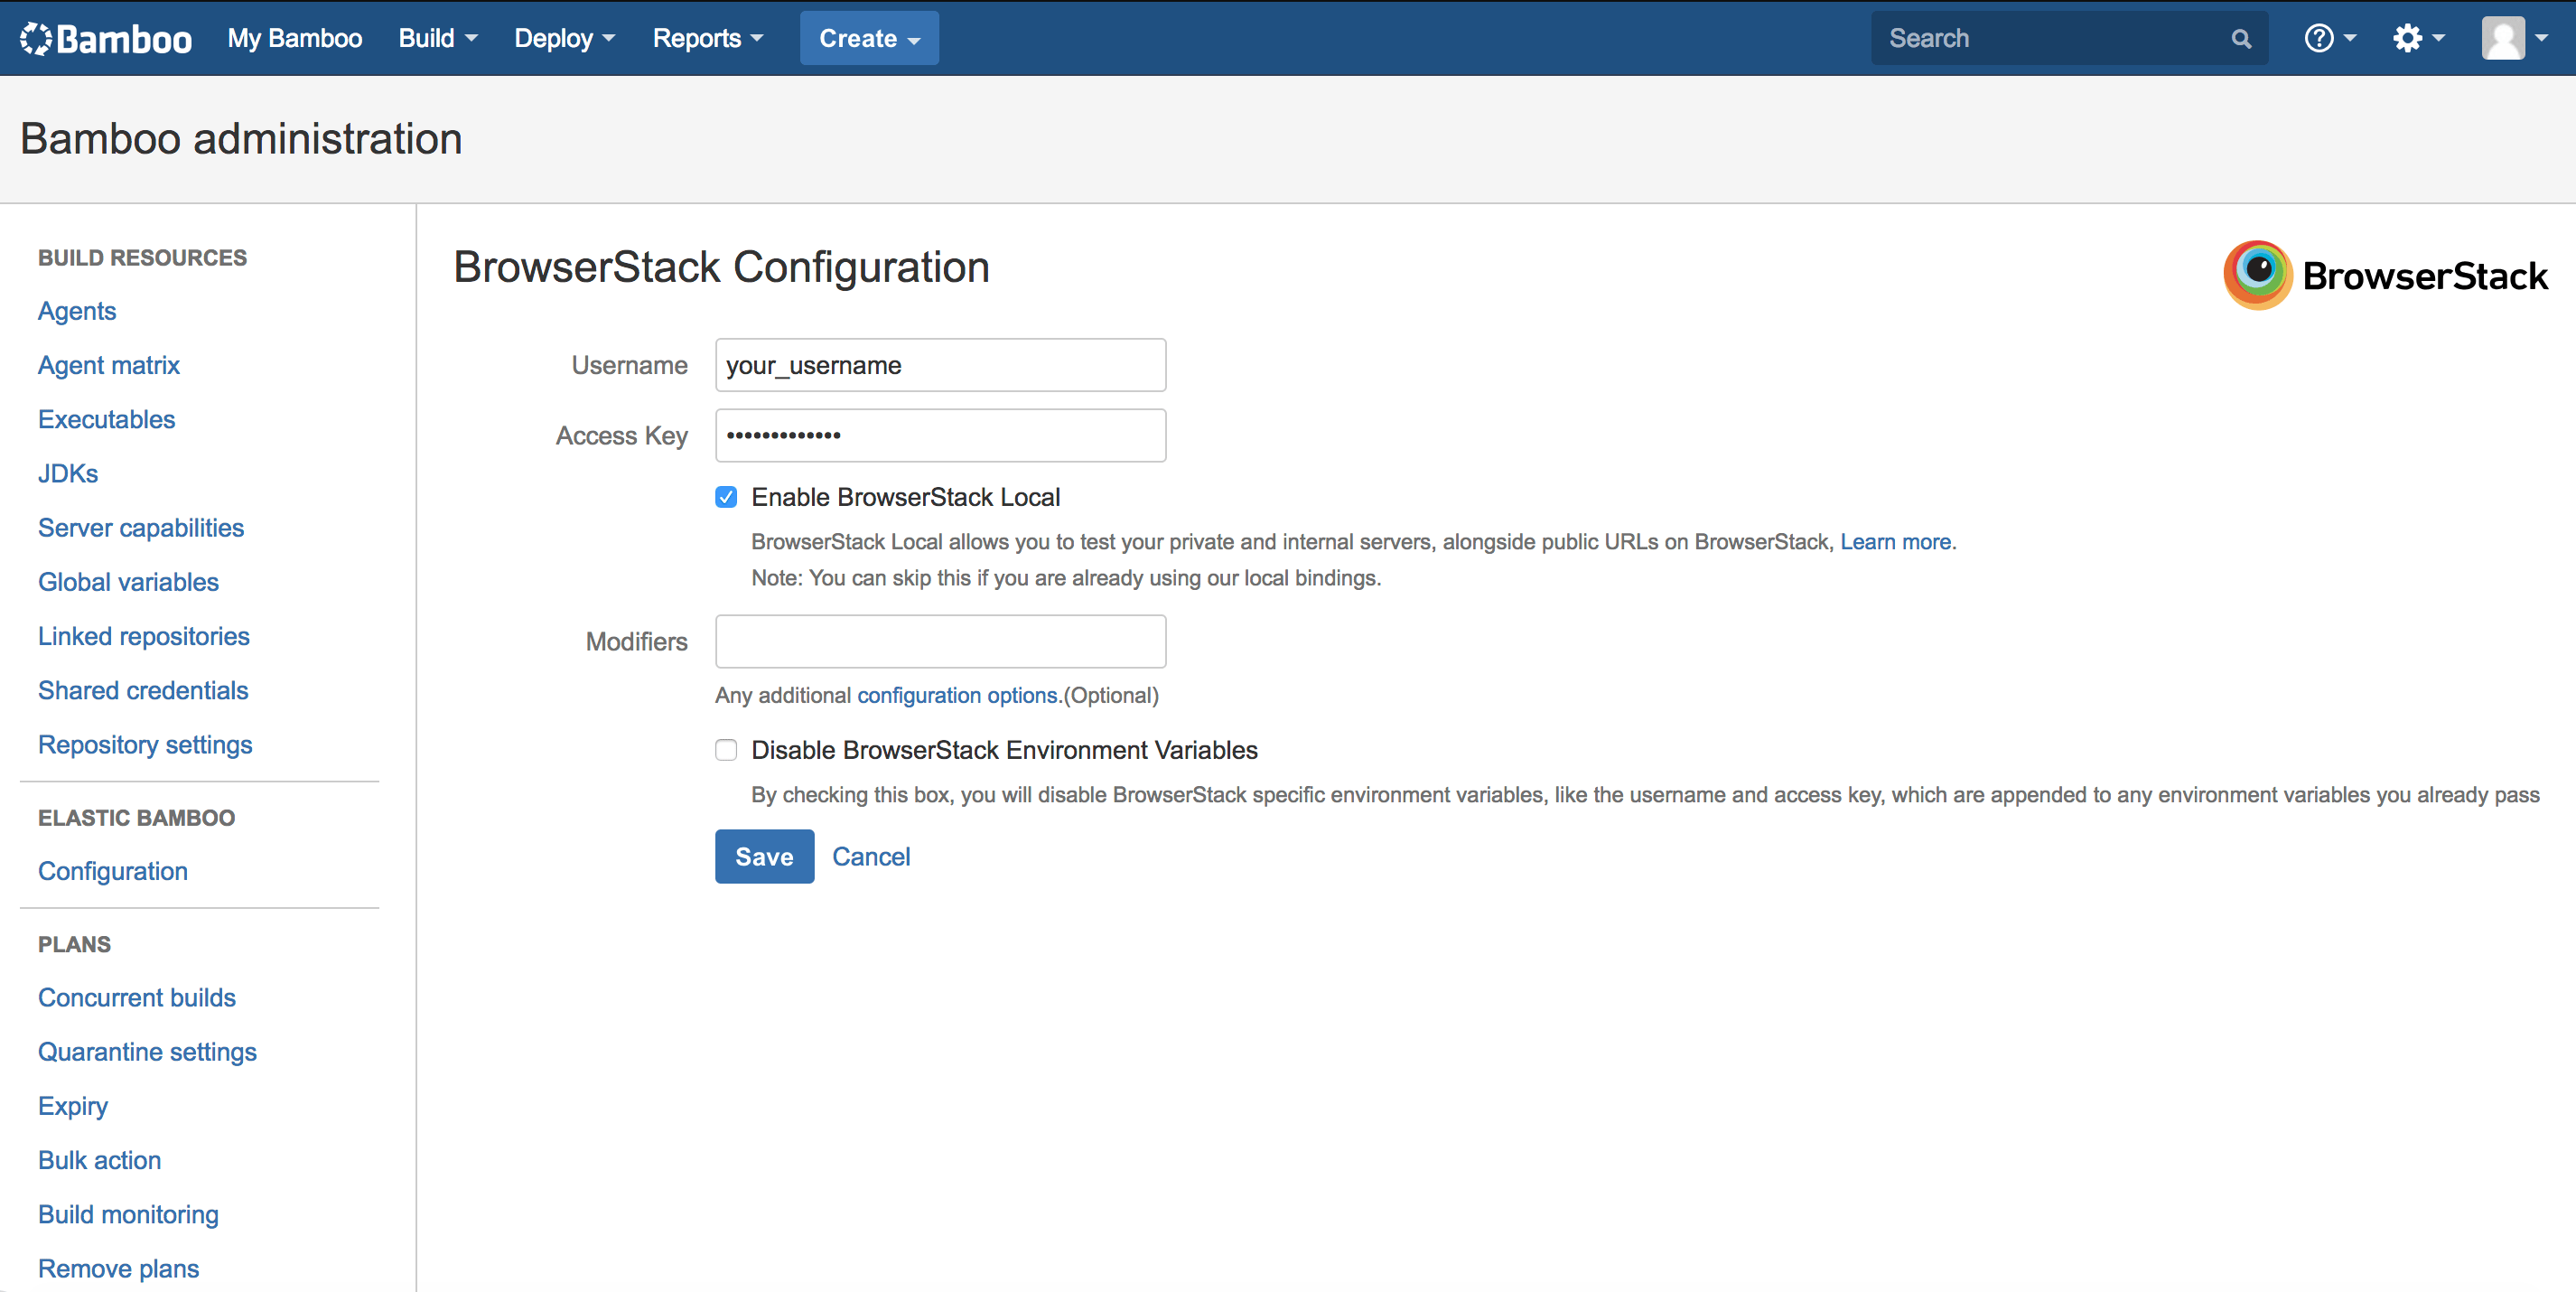 BrowserStack plugin configuration page in Bamboo administration